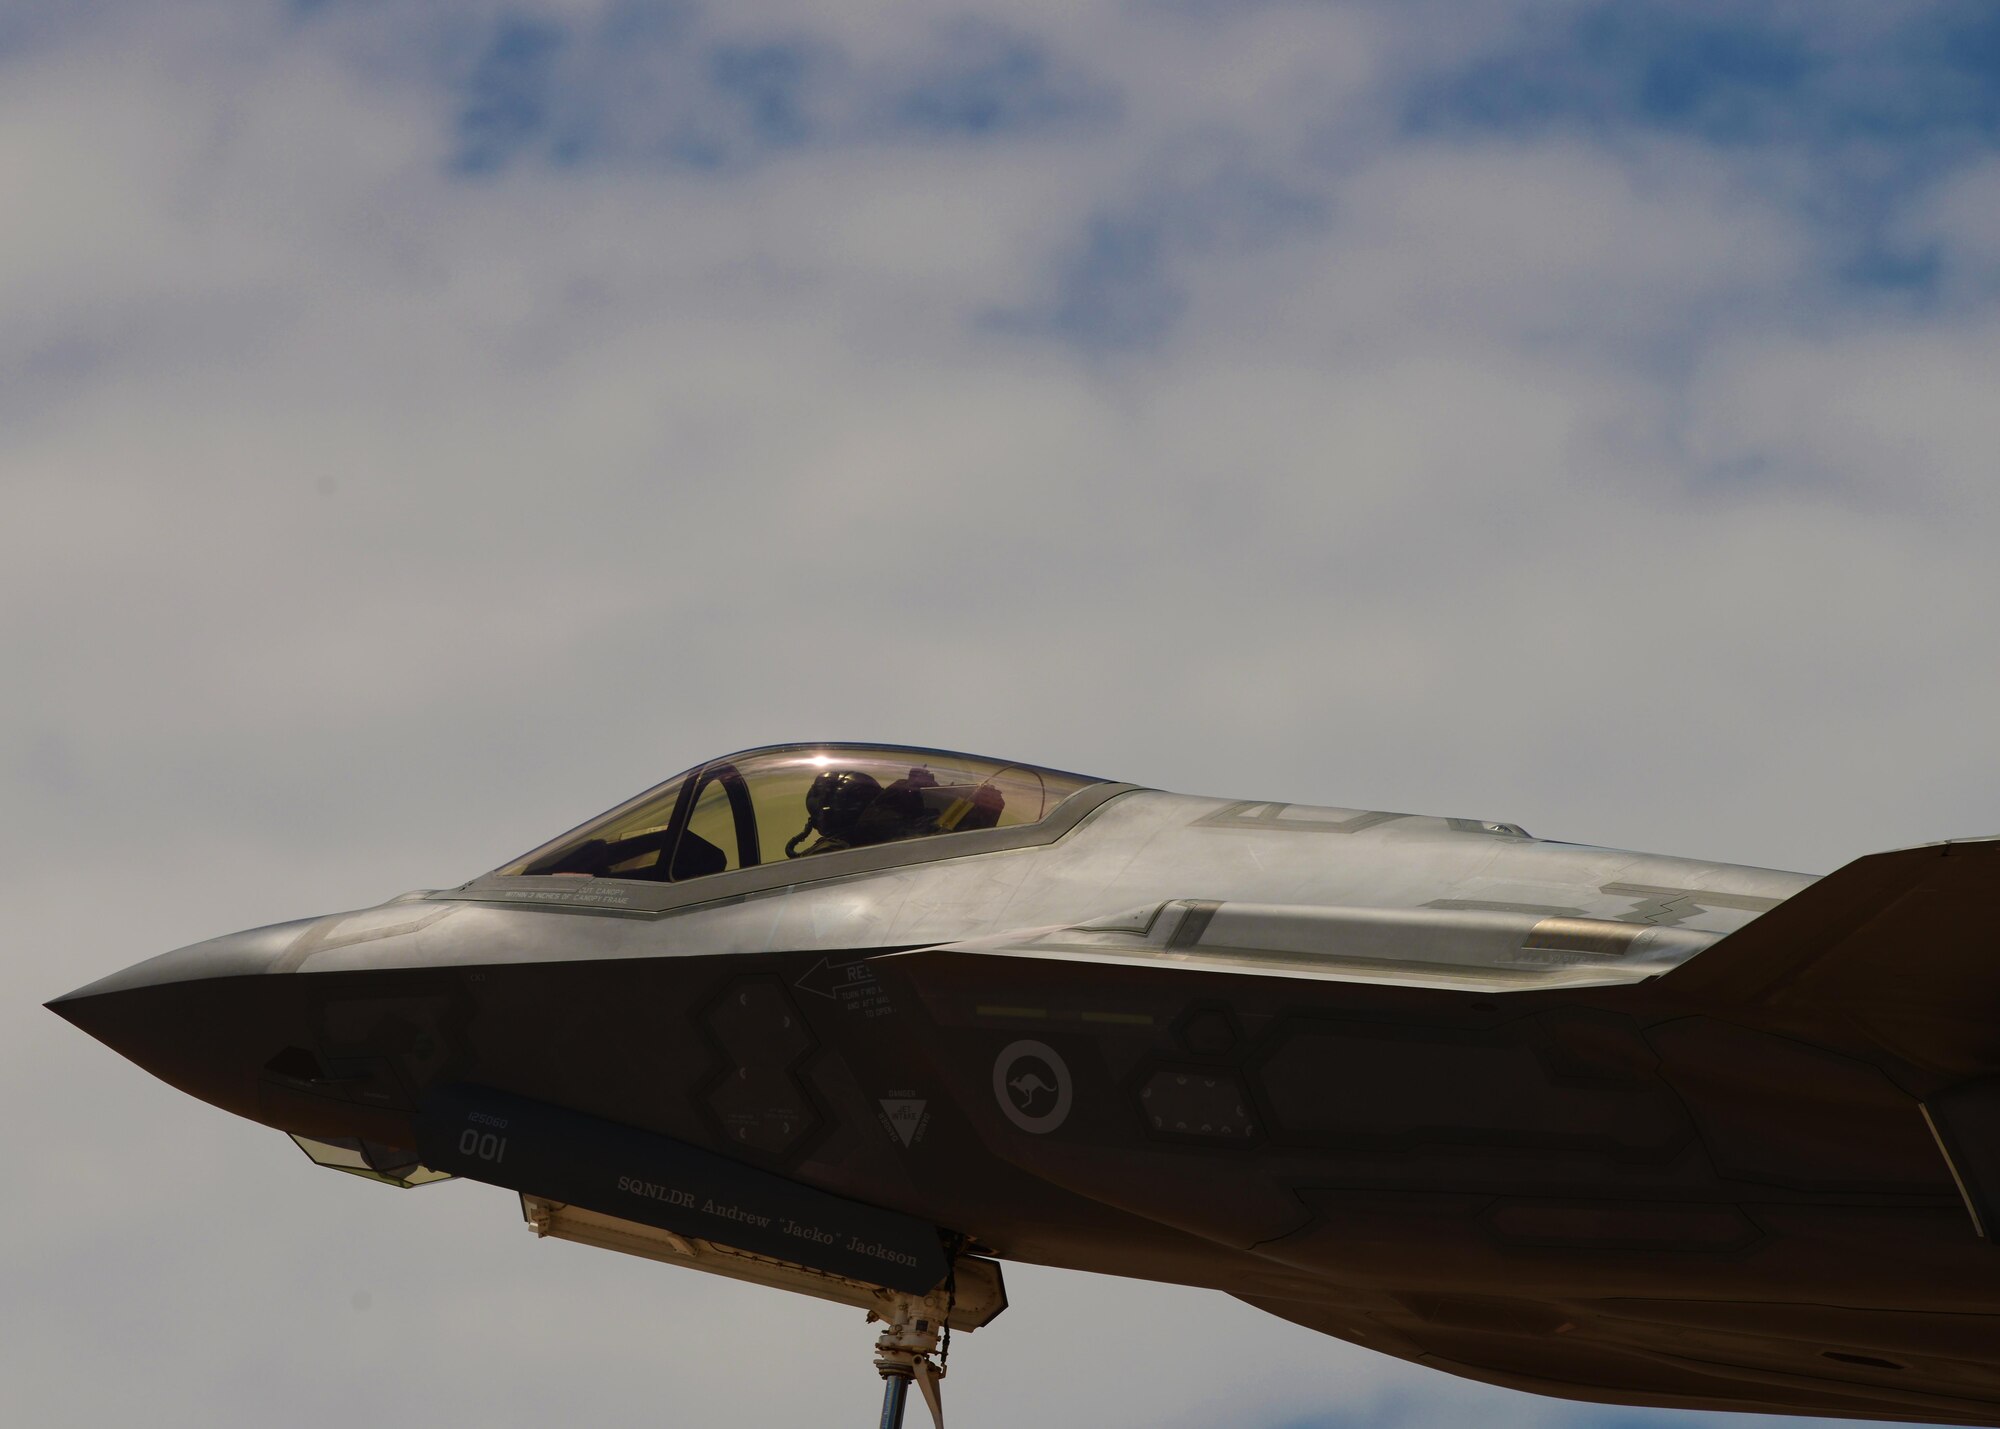 A Royal Australian Air Force F-35A Lightning II taxis down the runway at Luke Air Force Base, Ariz., July 17, 2017. Luke is the central hub for F-35A training often teaming international and U.S. pilots together to learn how to effectively employ the fifth-generation strike fighter. Today’s flight was the capstone flight exercise of the first F-35 basic course at Luke and featured F-35 pilots facing off against F-16 Fighting Falcons. (U.S. Air Force photo/Airman 1st Class Caleb Worpel) 